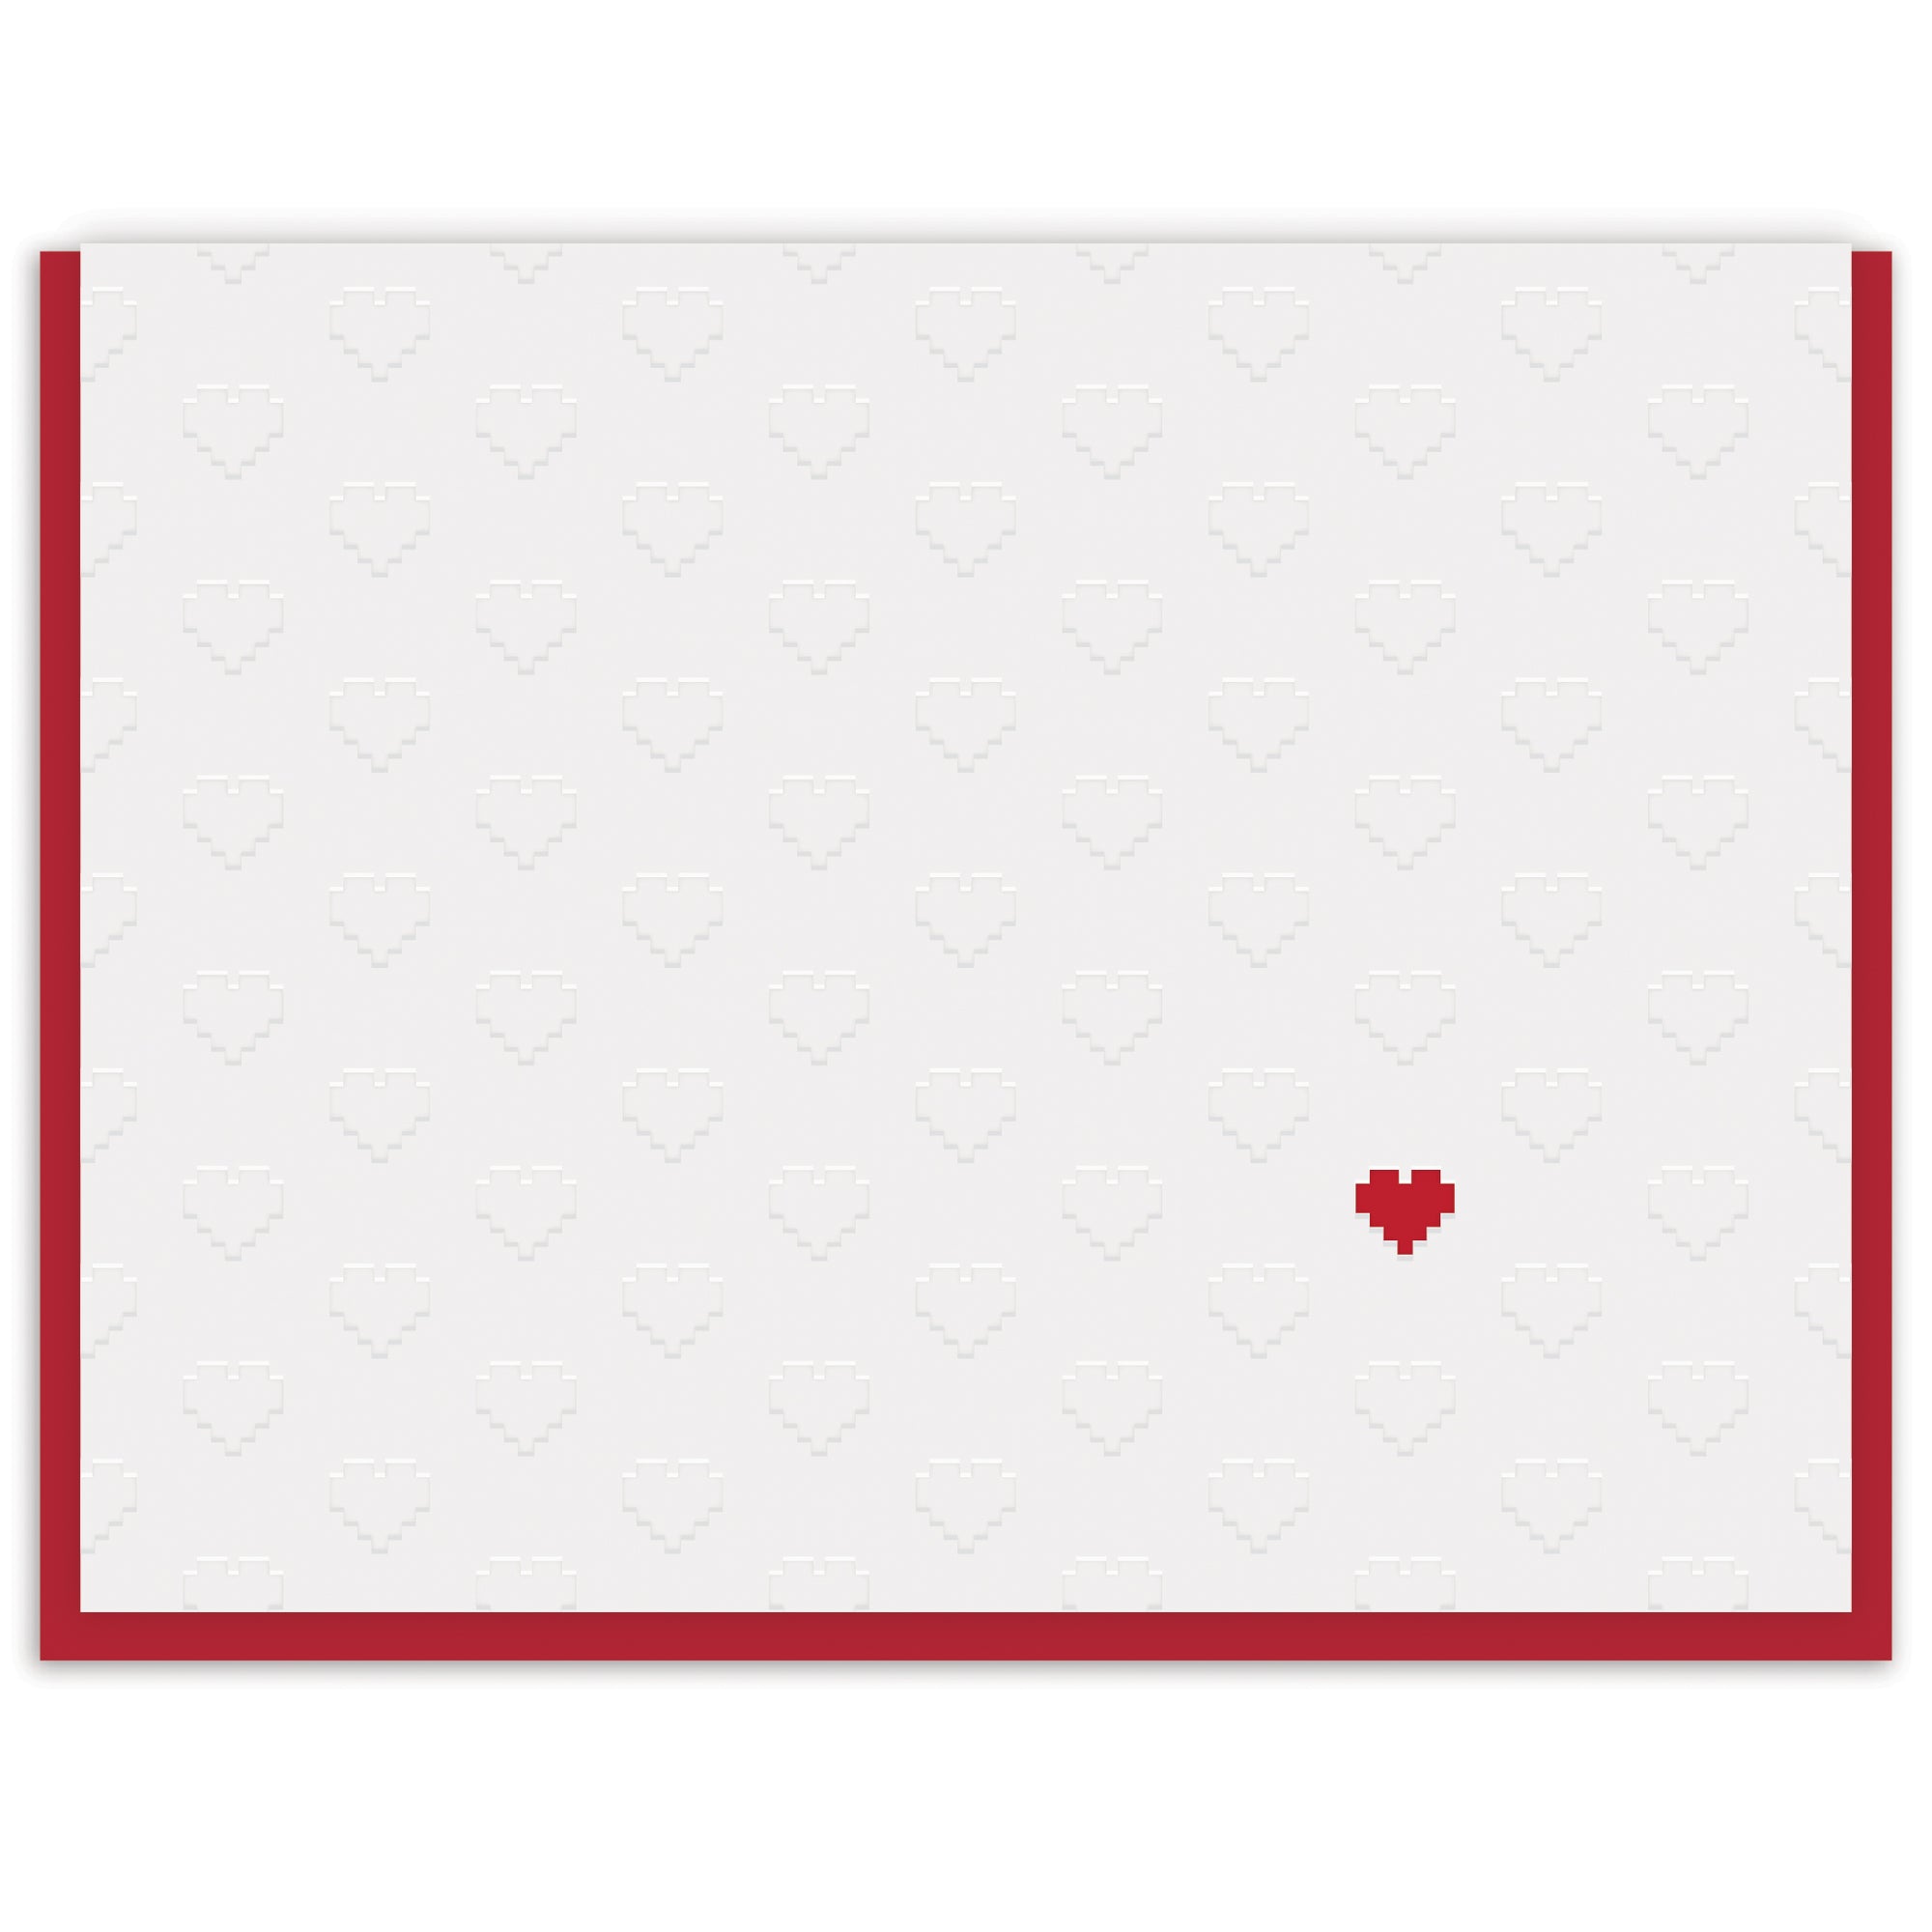 Pixel Perfect Hearts Blank Card